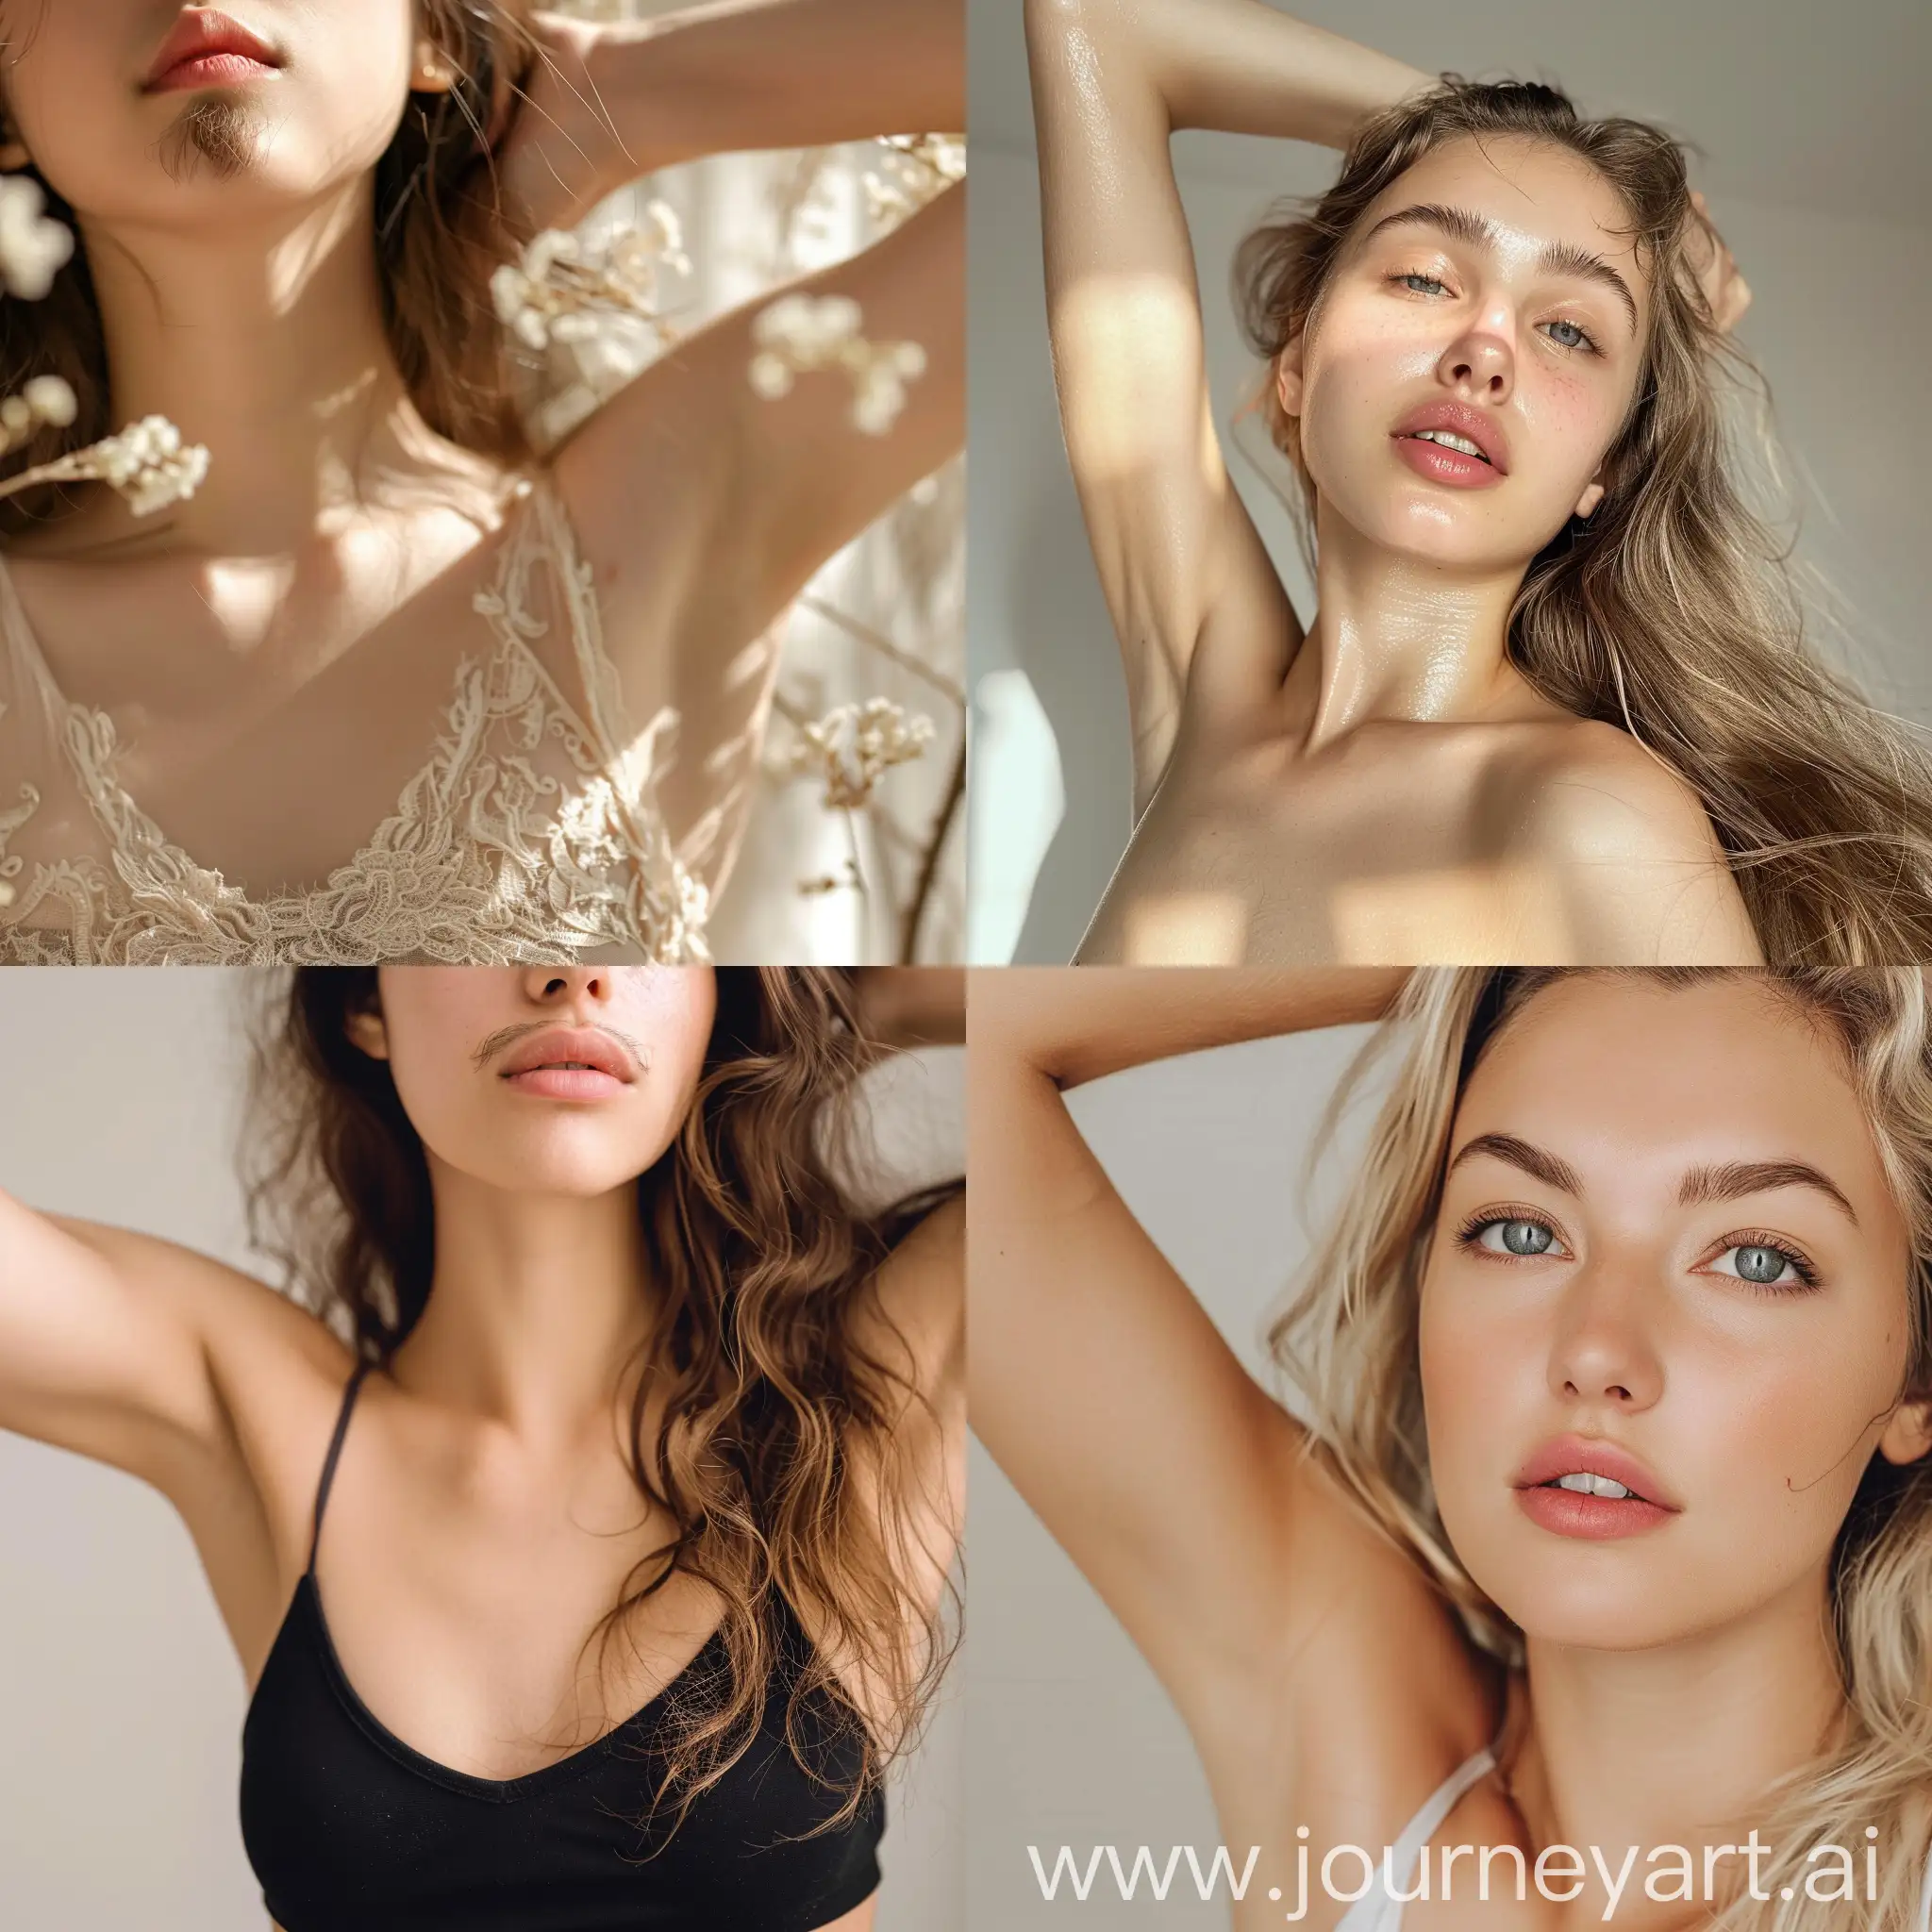 Beautiful-Woman-with-Underarm-Hair-Lifts-Arm-in-Graceful-Gesture